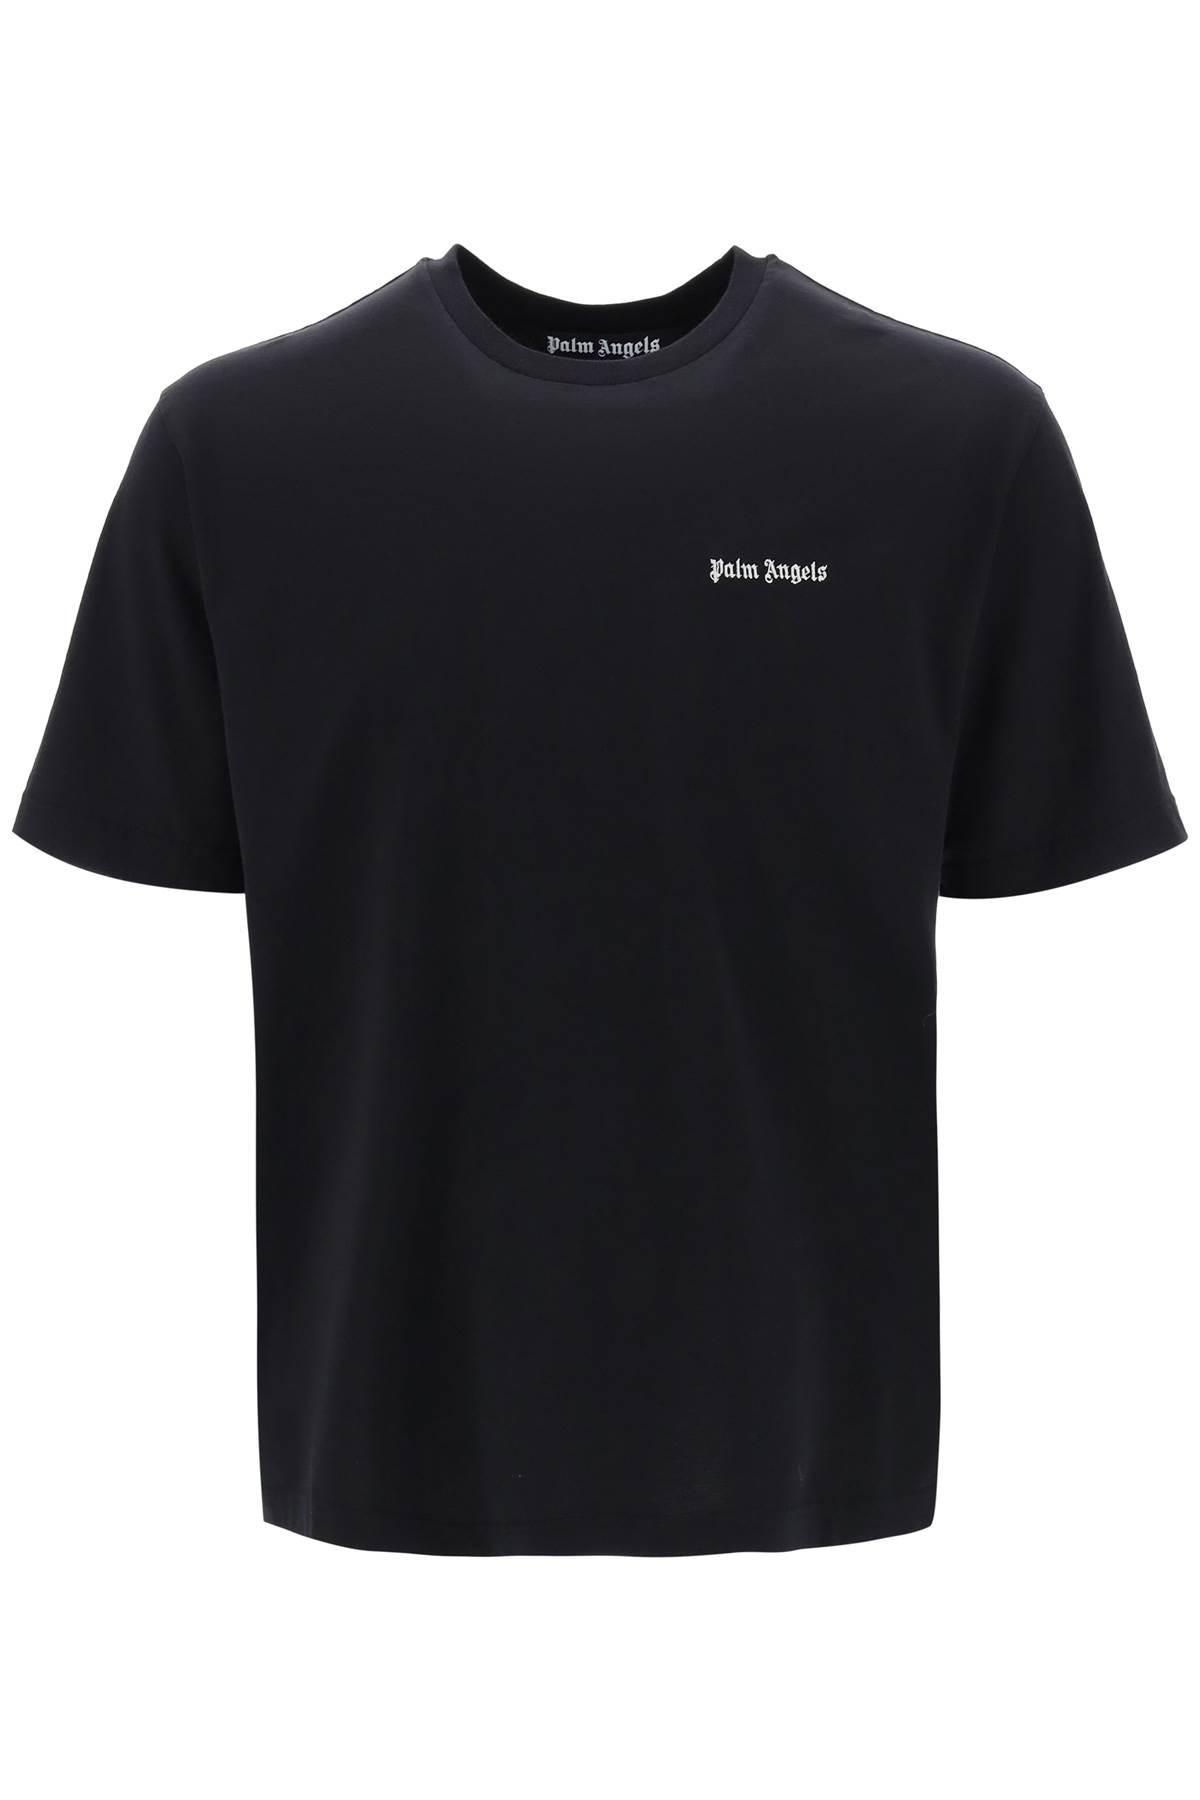 Palm Angels Jersey T Shirt With Logo Embroidery in Black for Men